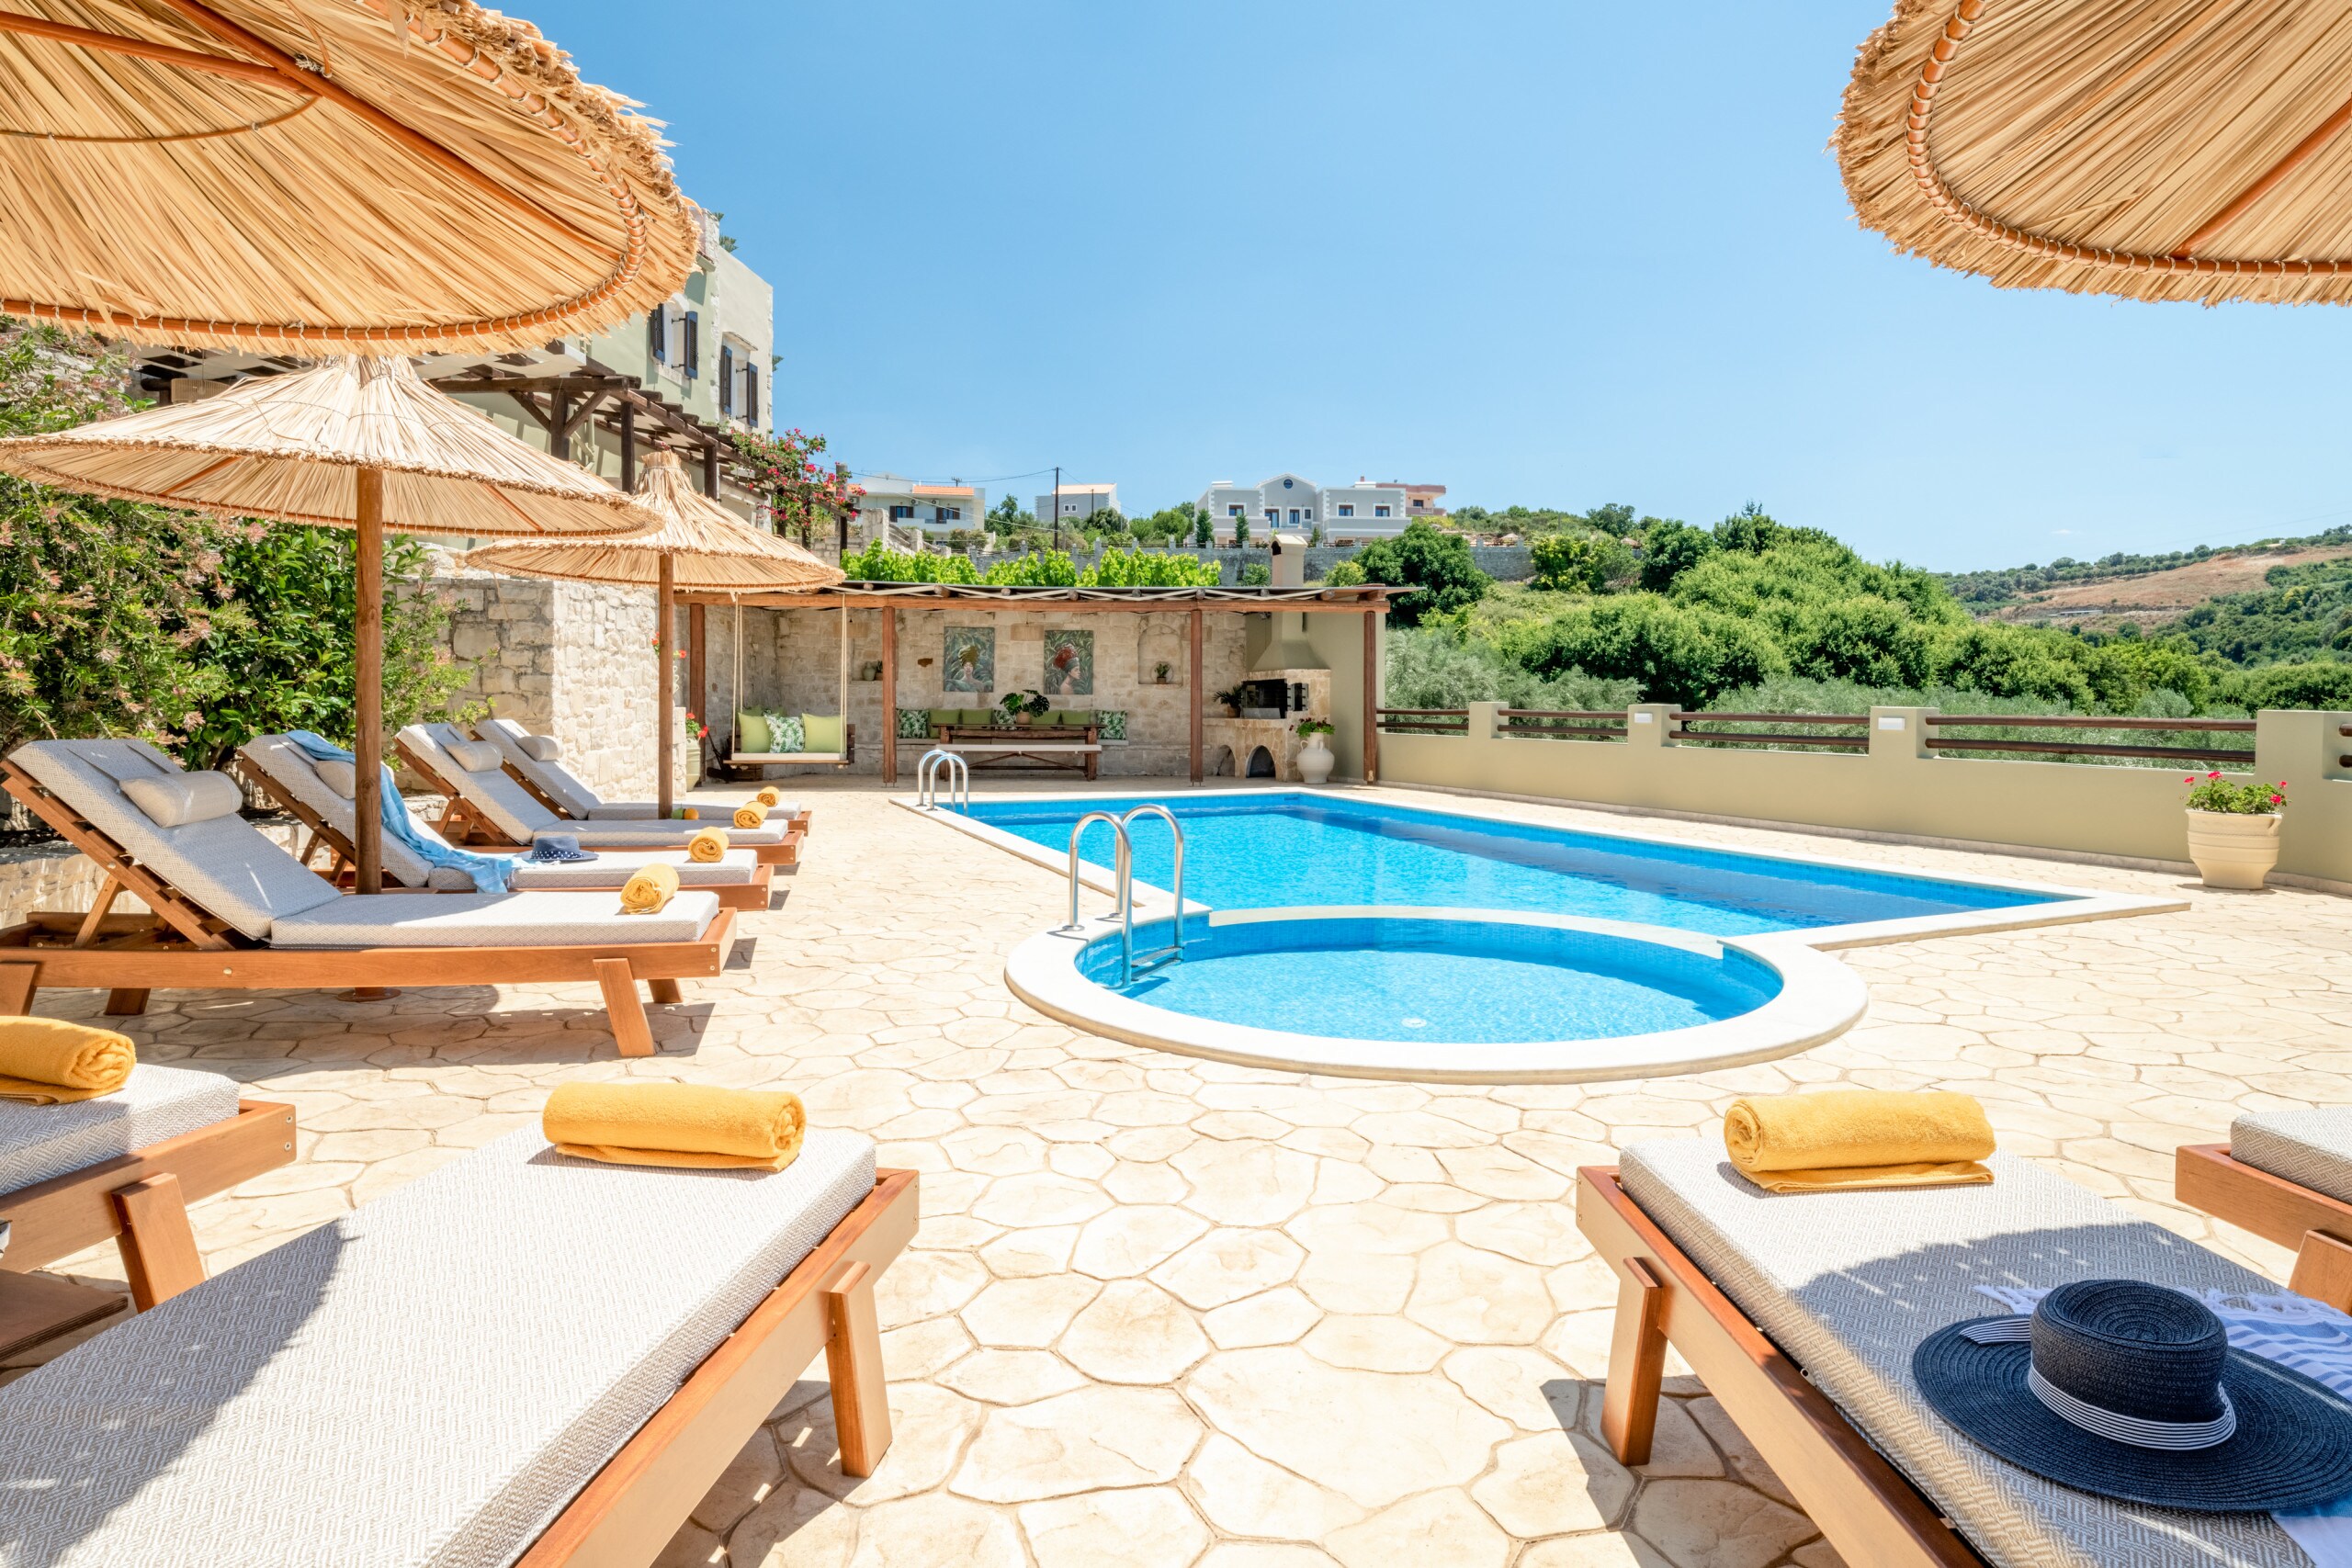 The pool terrace is equipped with high quality sun beds and umbrellas.